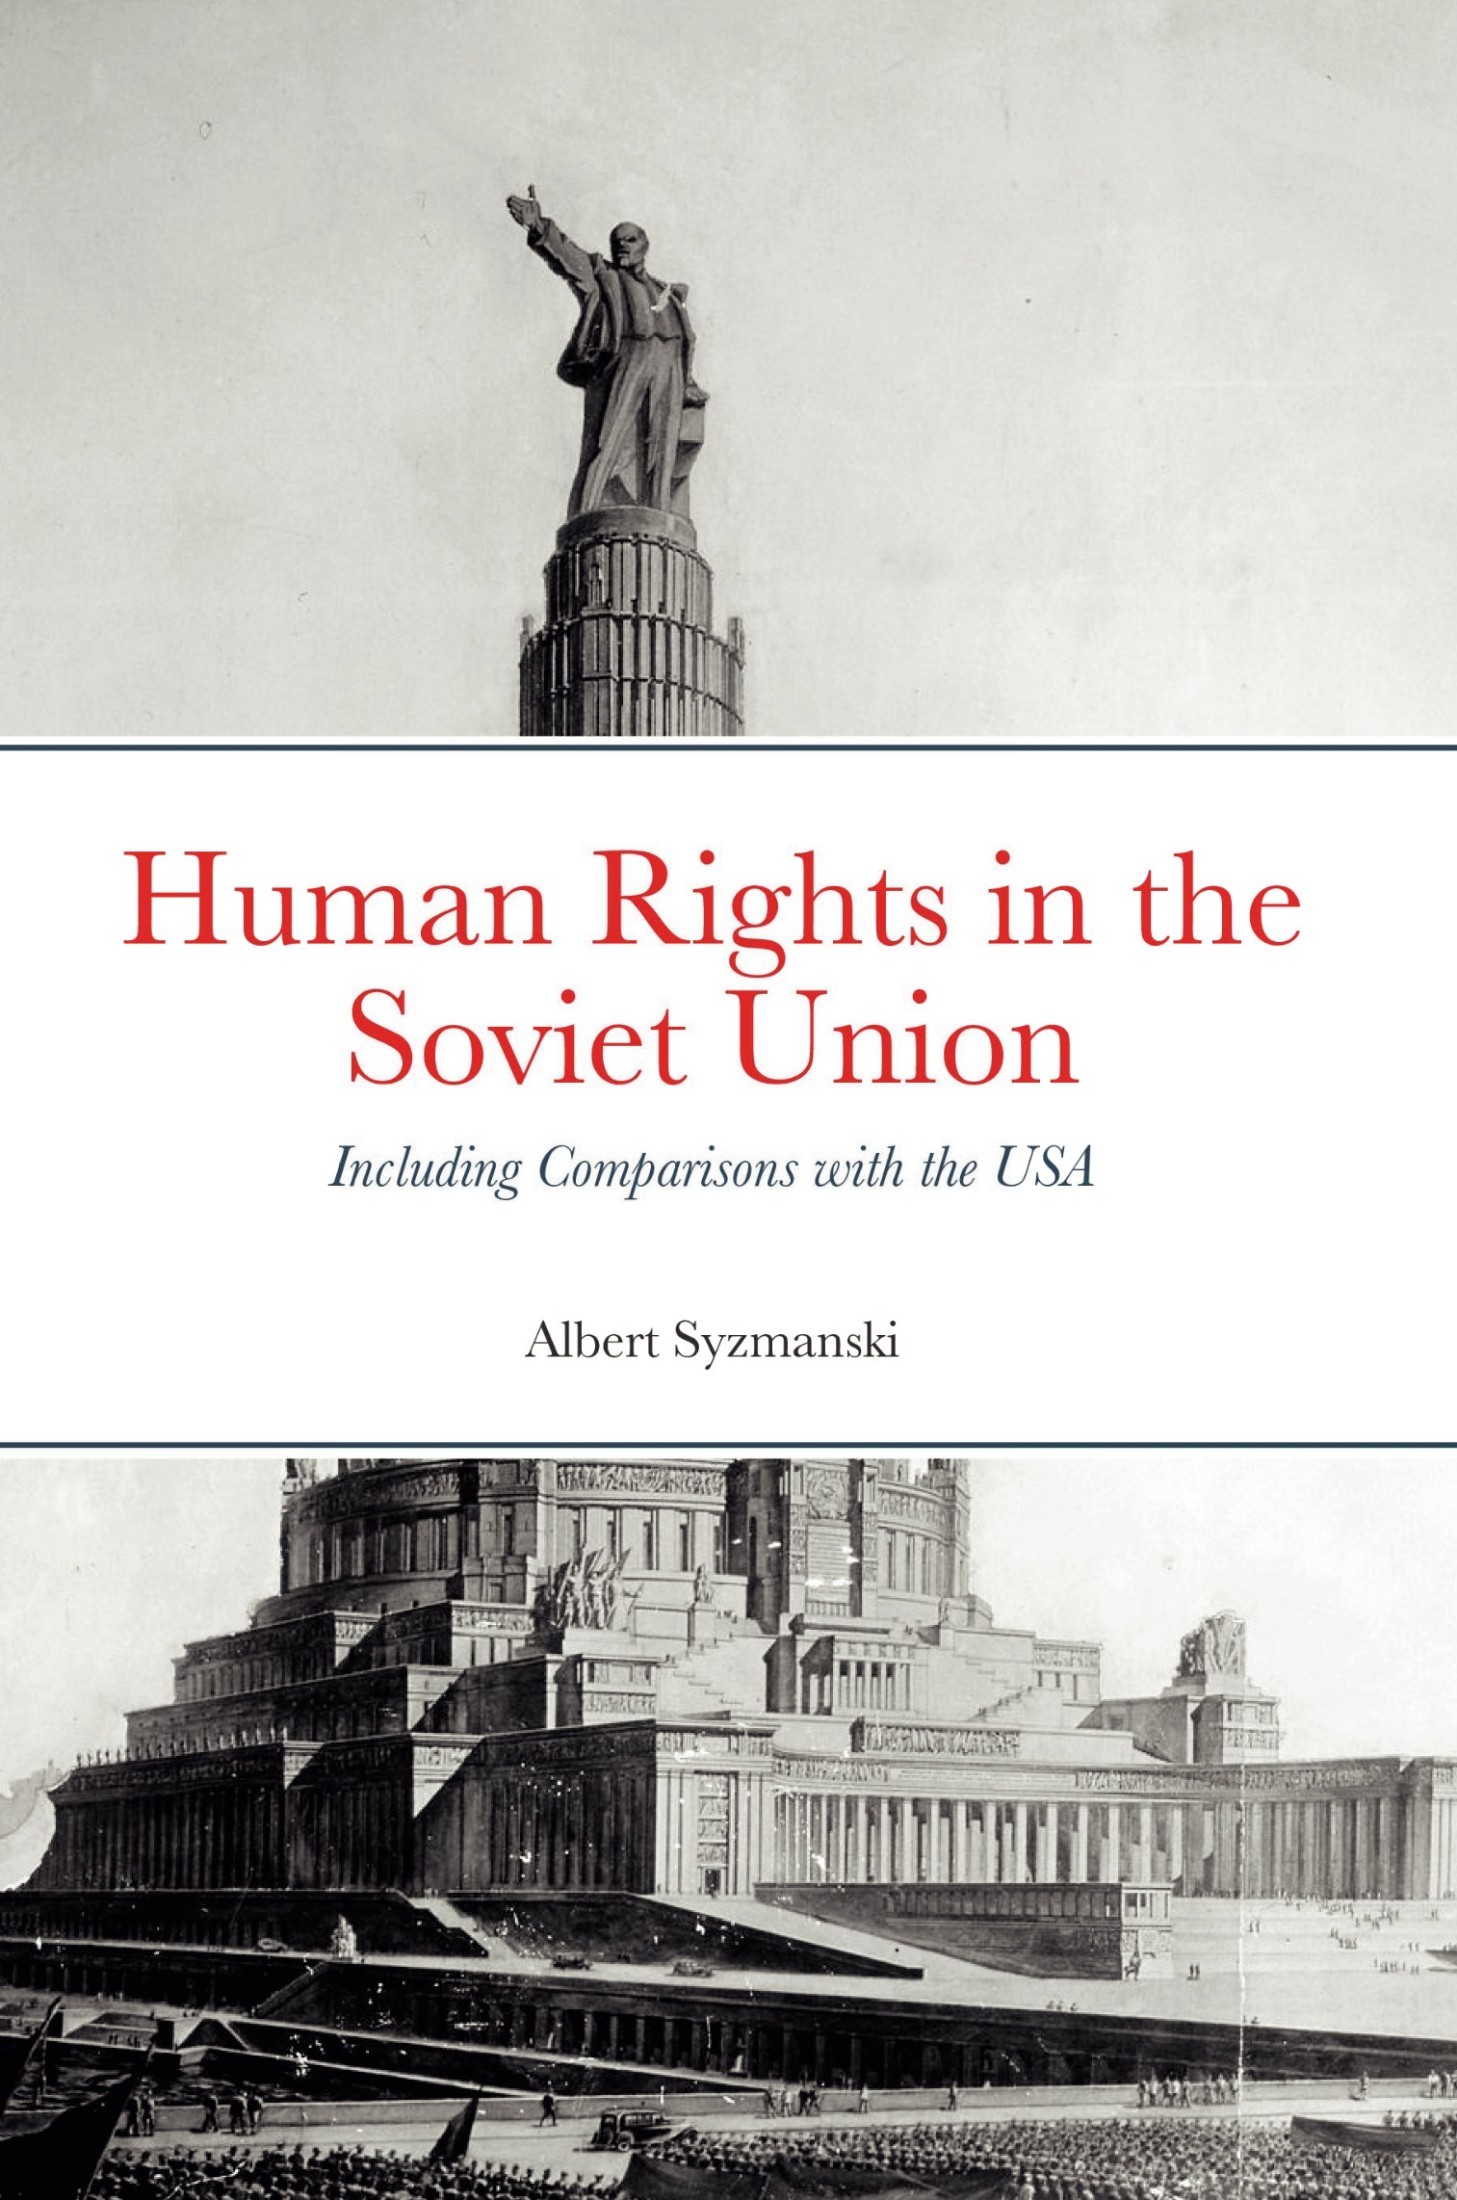 Human Rights in the Soviet Union